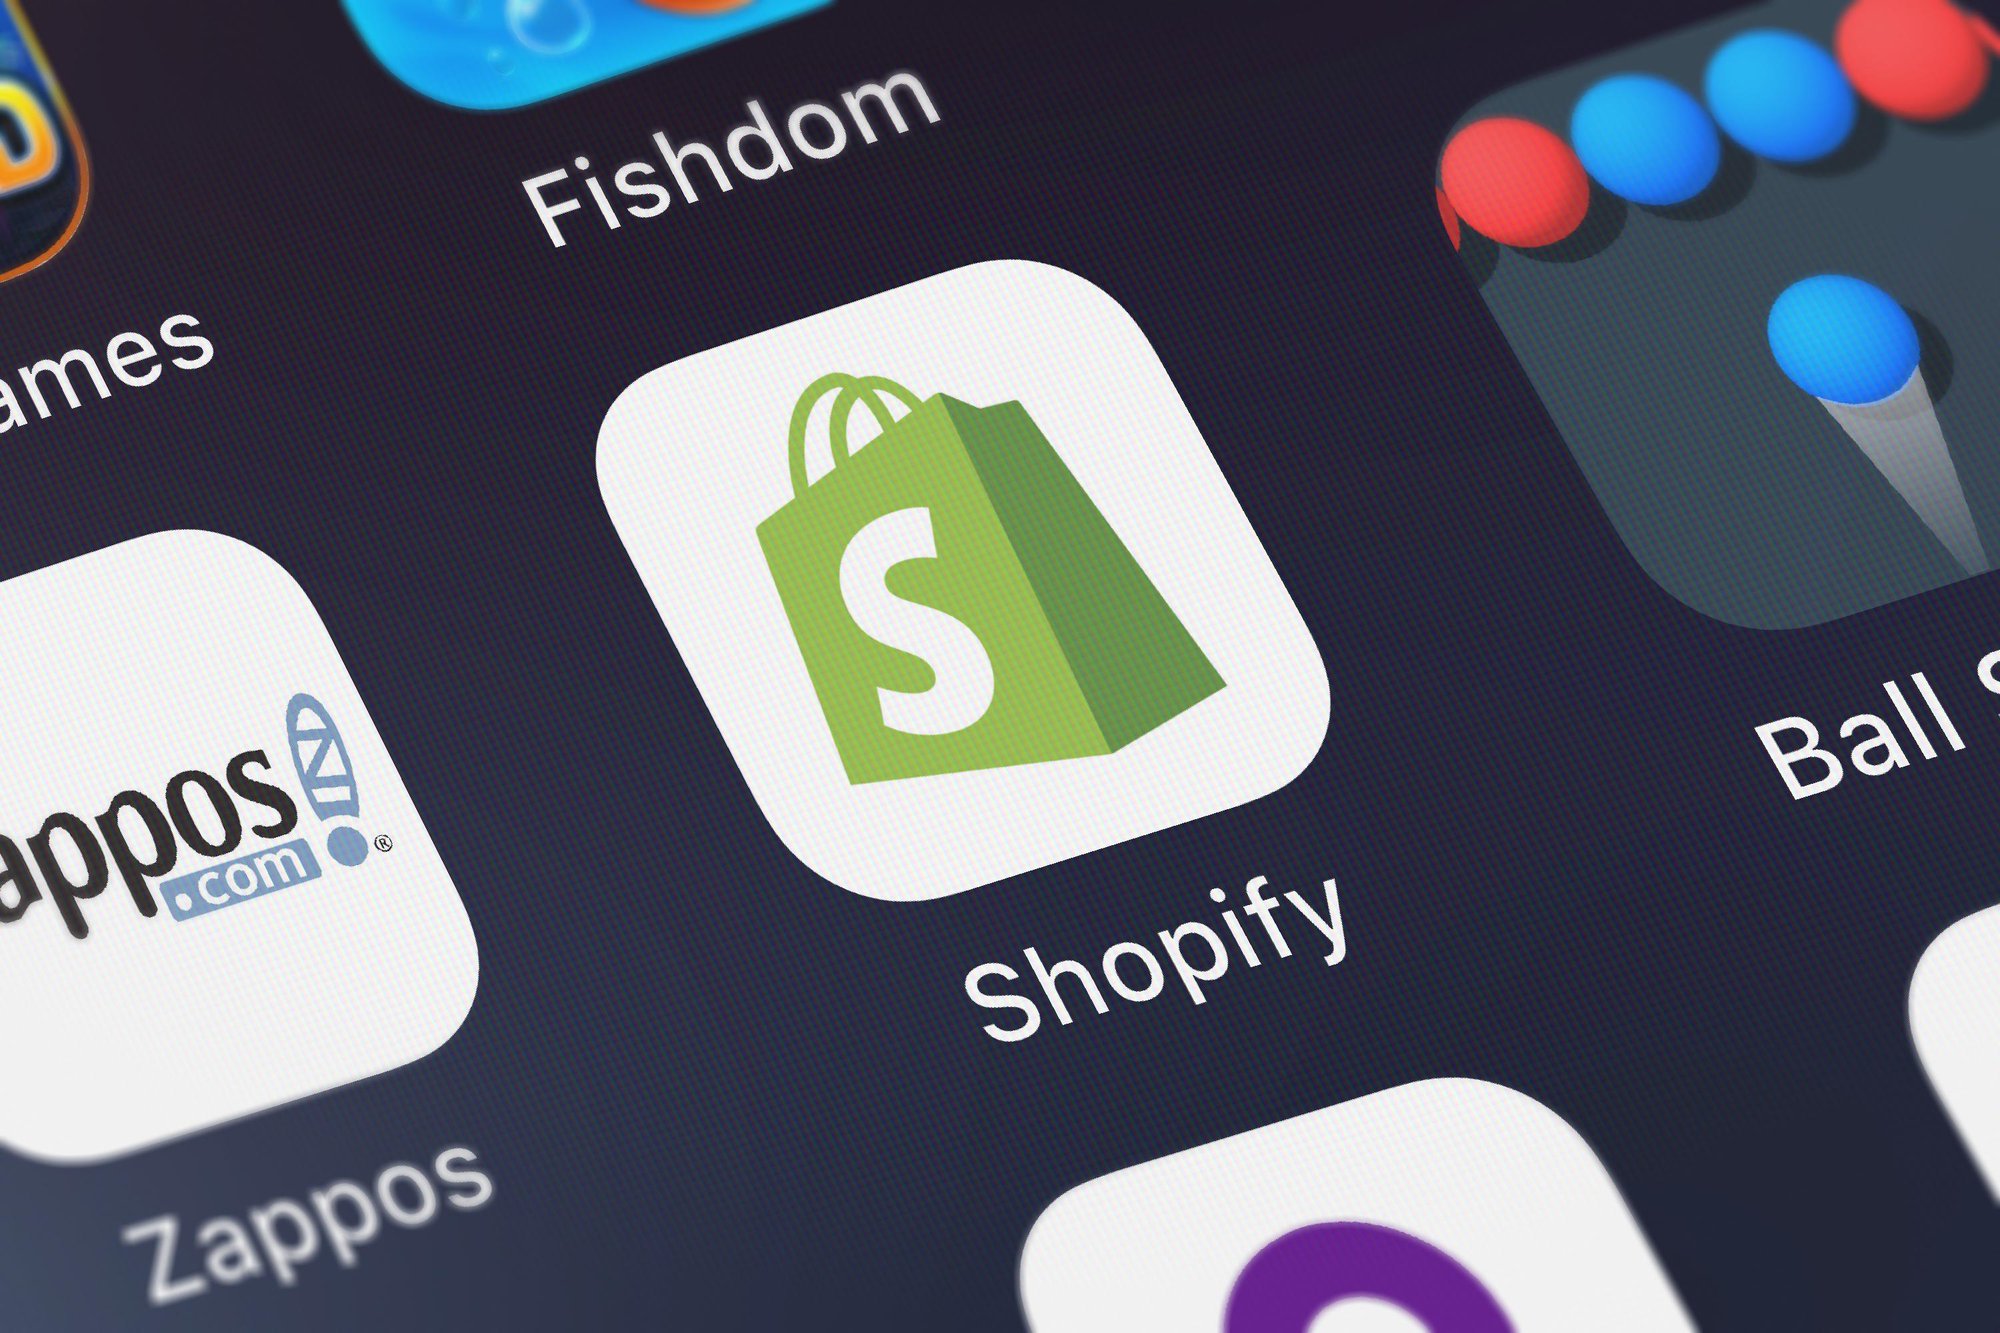 37 Shopify Stores that Have Skyrocketed Their Sales Growth